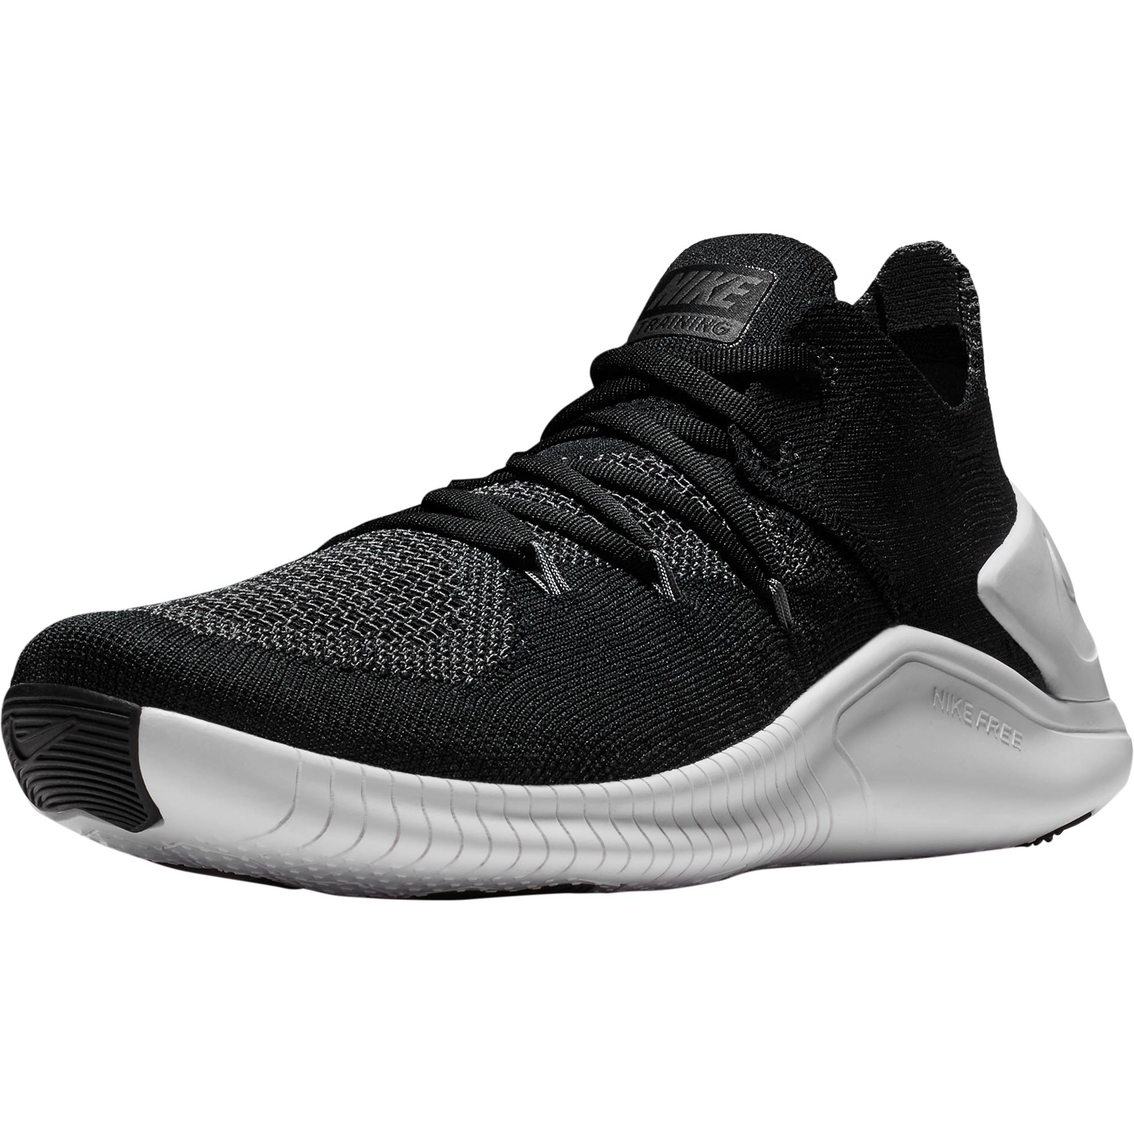 nike free tr flyknit 3 black and white